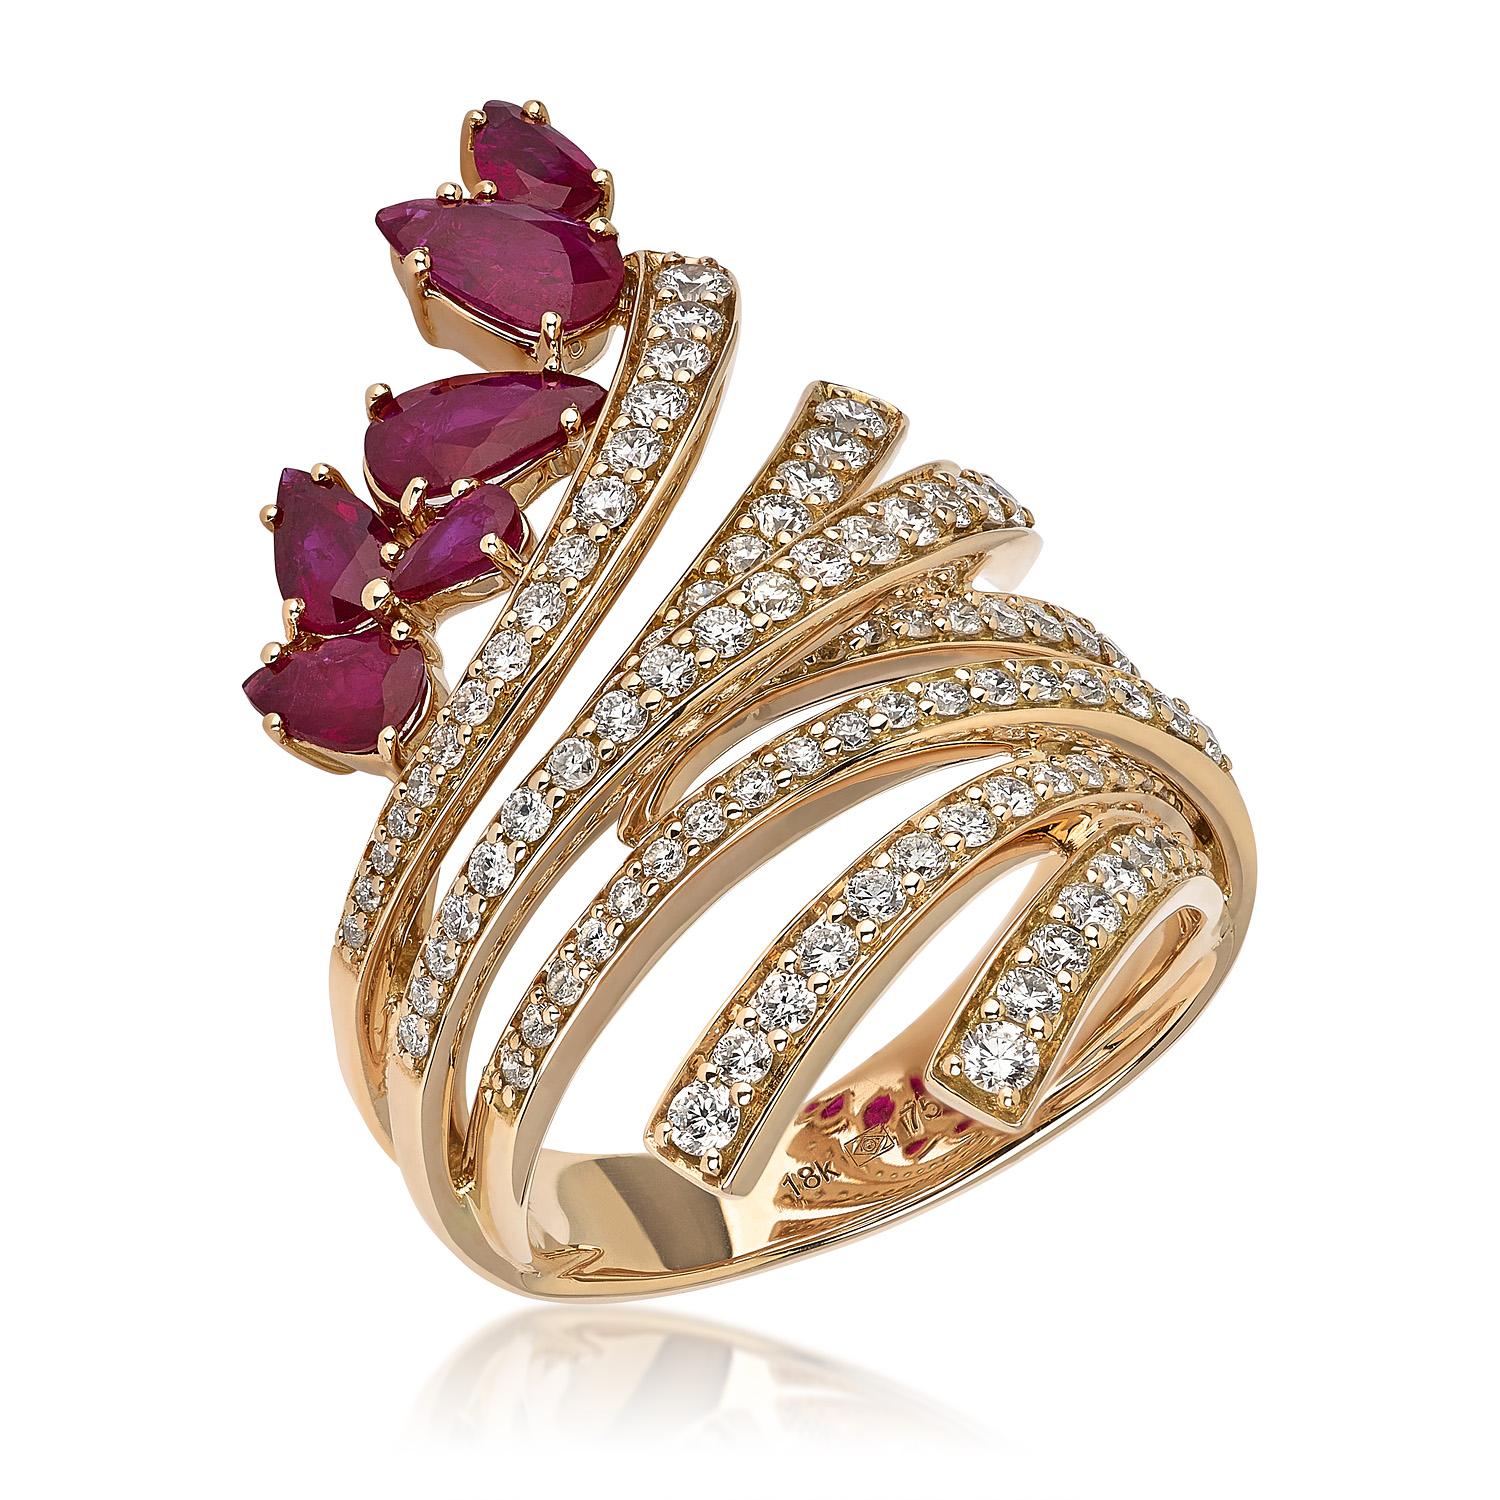 Get swept away by the Mirage Collection's vivid gemstones and intricately placed diamonds set in 18k gold. These designs bring life to bold silhouettes reminiscent of birds and flowers from exotic lands